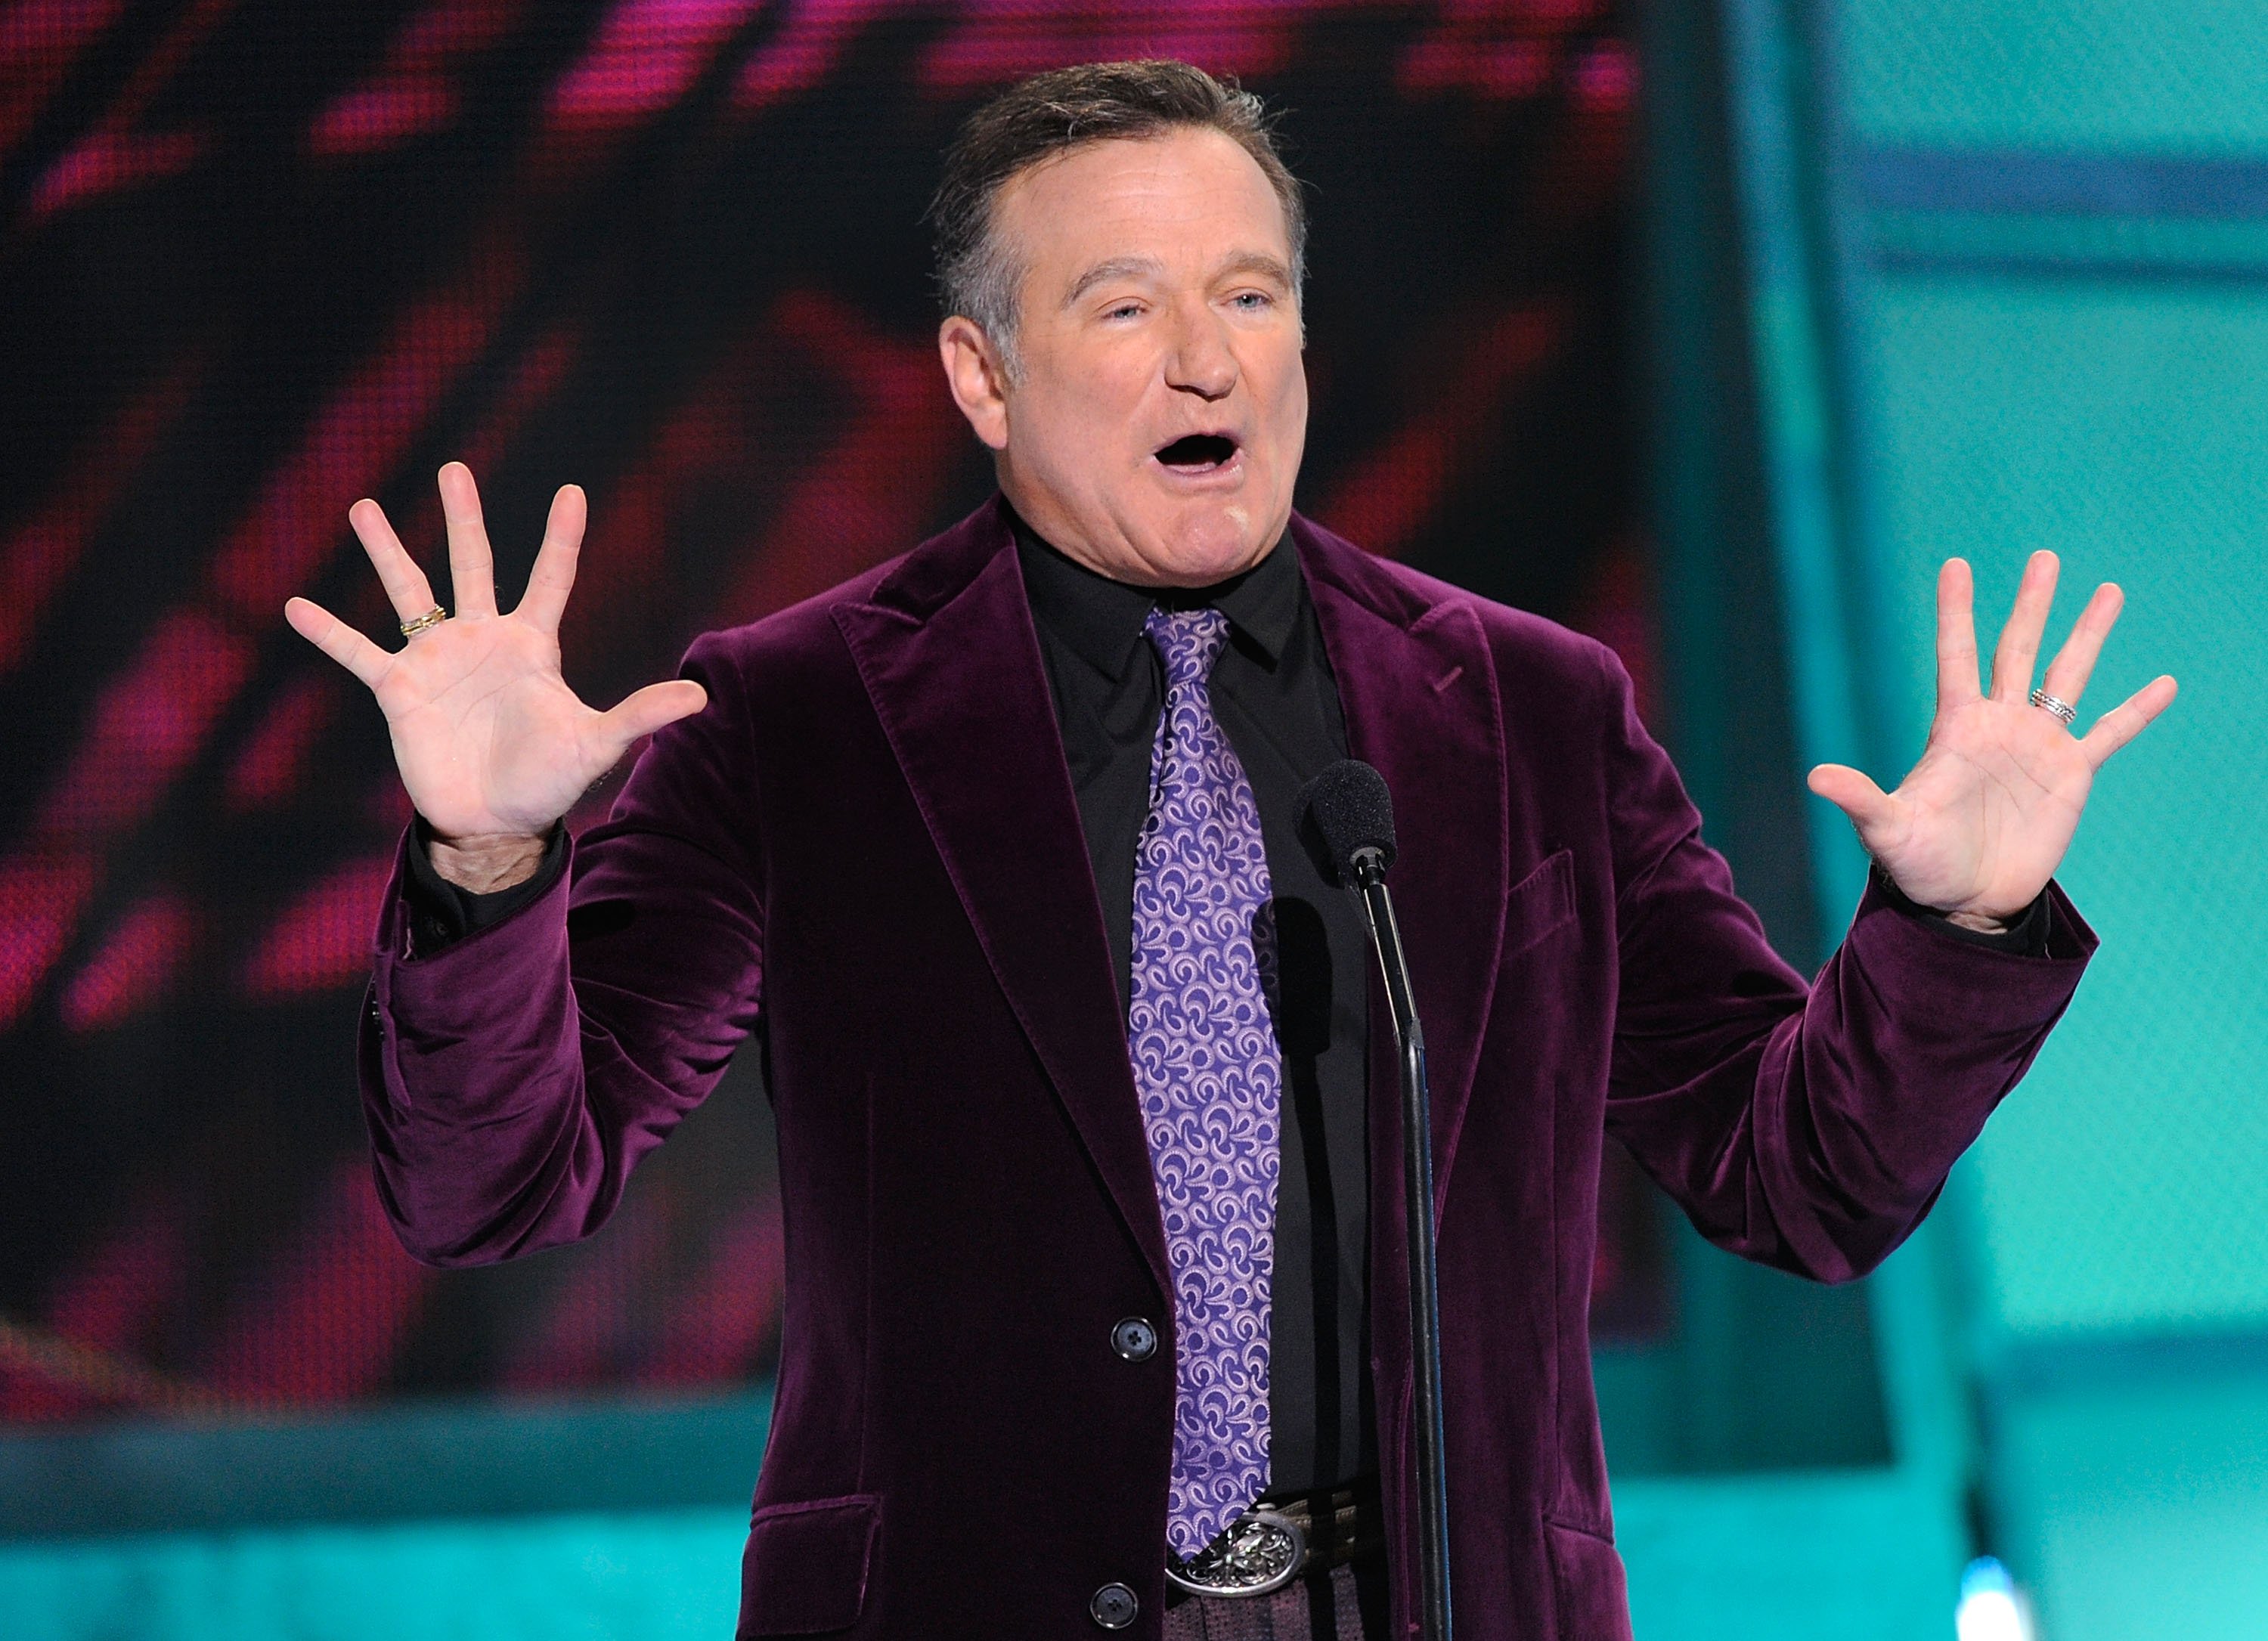 Robin Williams speaks at the People's Choice Awards in Los Angeles, California on January 7, 2009 | Photo: Getty images